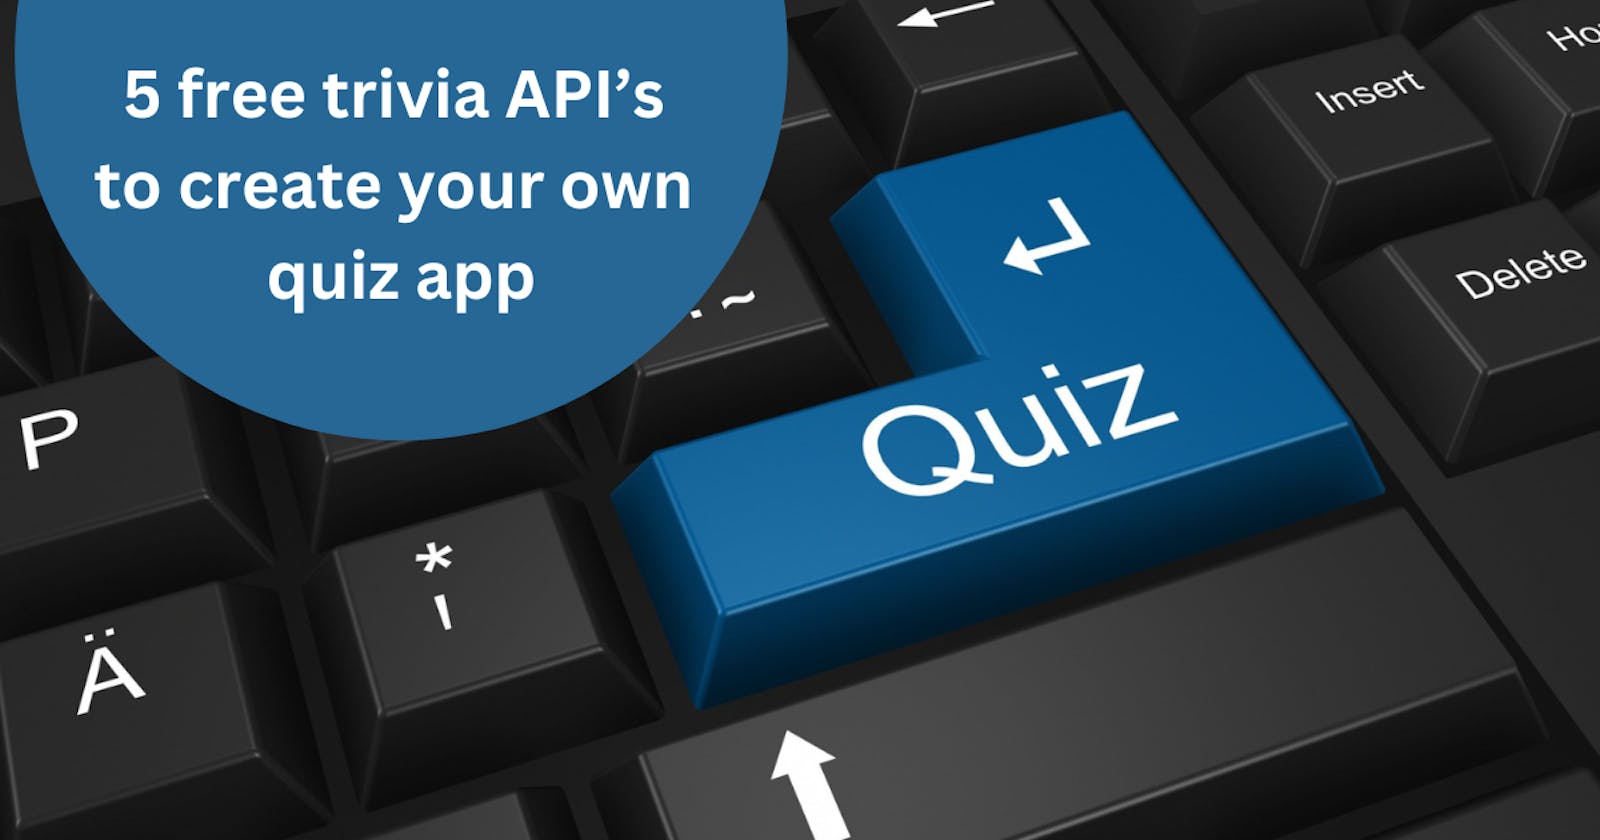 5 Free Trivia API's to create your own Quiz App